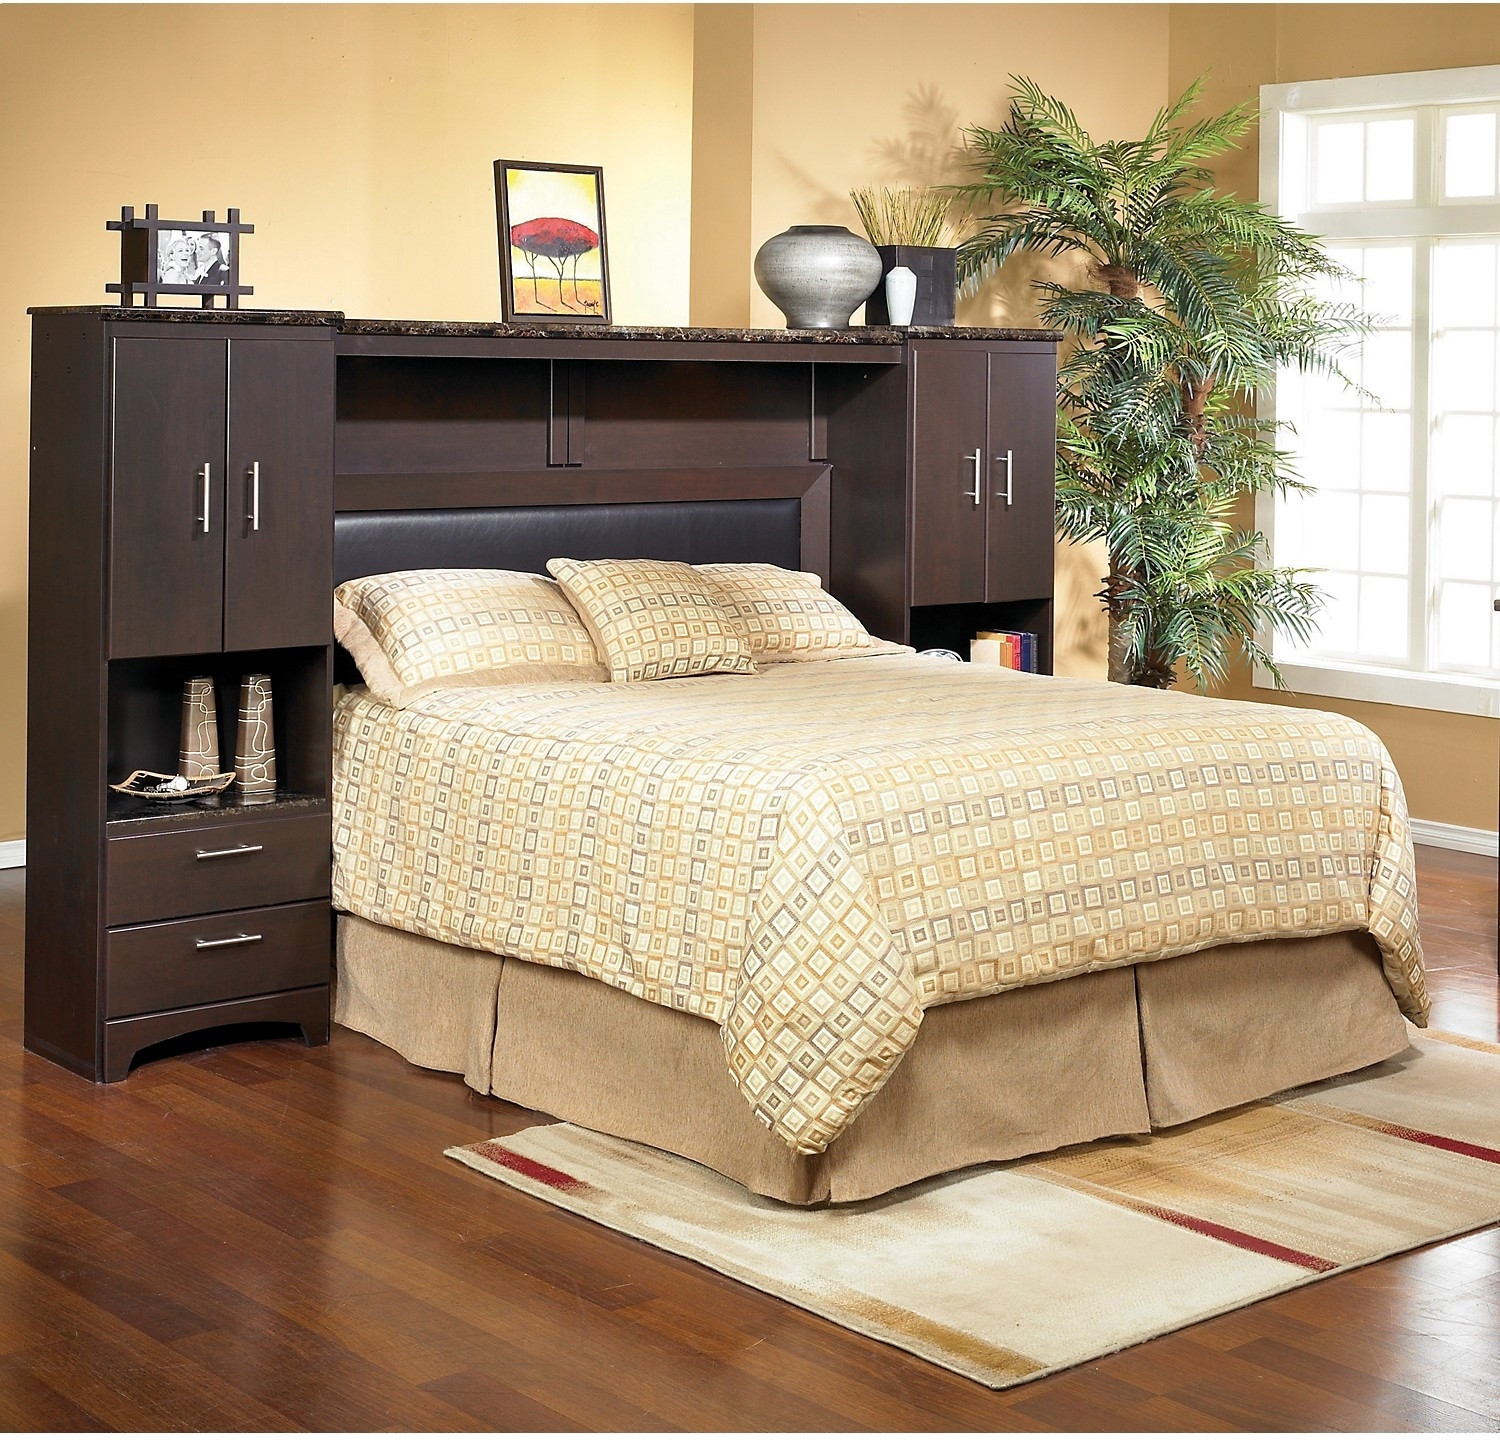 Wall Unit Bedroom Furniture
 Oxford Queen Wall Bed with Piers